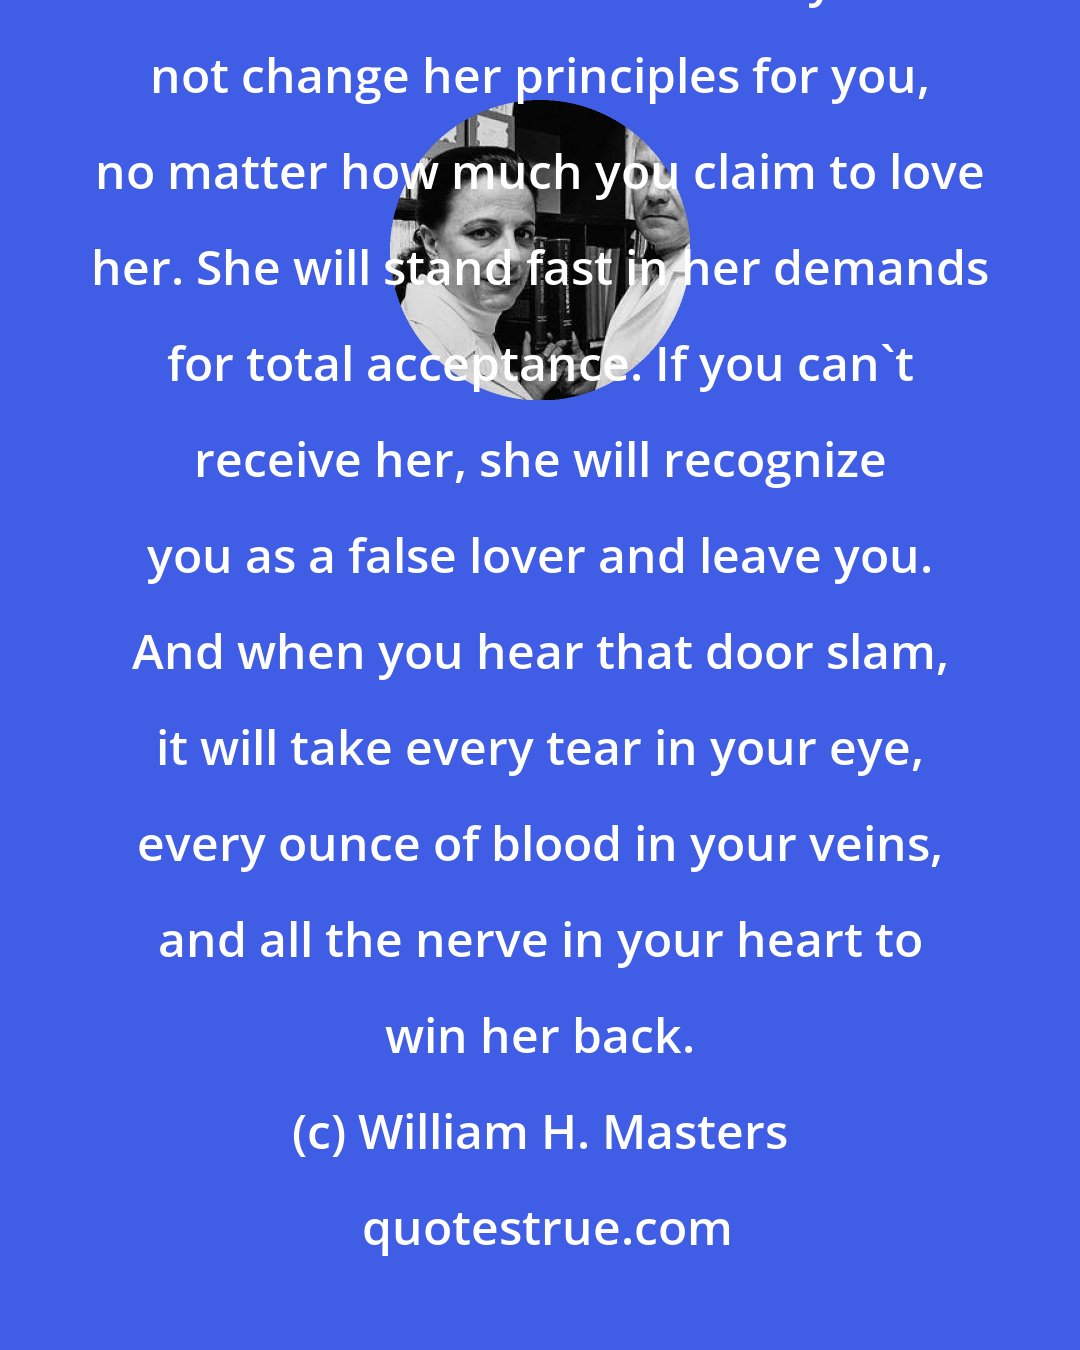 William H. Masters: Liberty is a harsh mistress. You cannot pick and choose what you like and dislike about her. Liberty will not change her principles for you, no matter how much you claim to love her. She will stand fast in her demands for total acceptance. If you can't receive her, she will recognize you as a false lover and leave you. And when you hear that door slam, it will take every tear in your eye, every ounce of blood in your veins, and all the nerve in your heart to win her back.